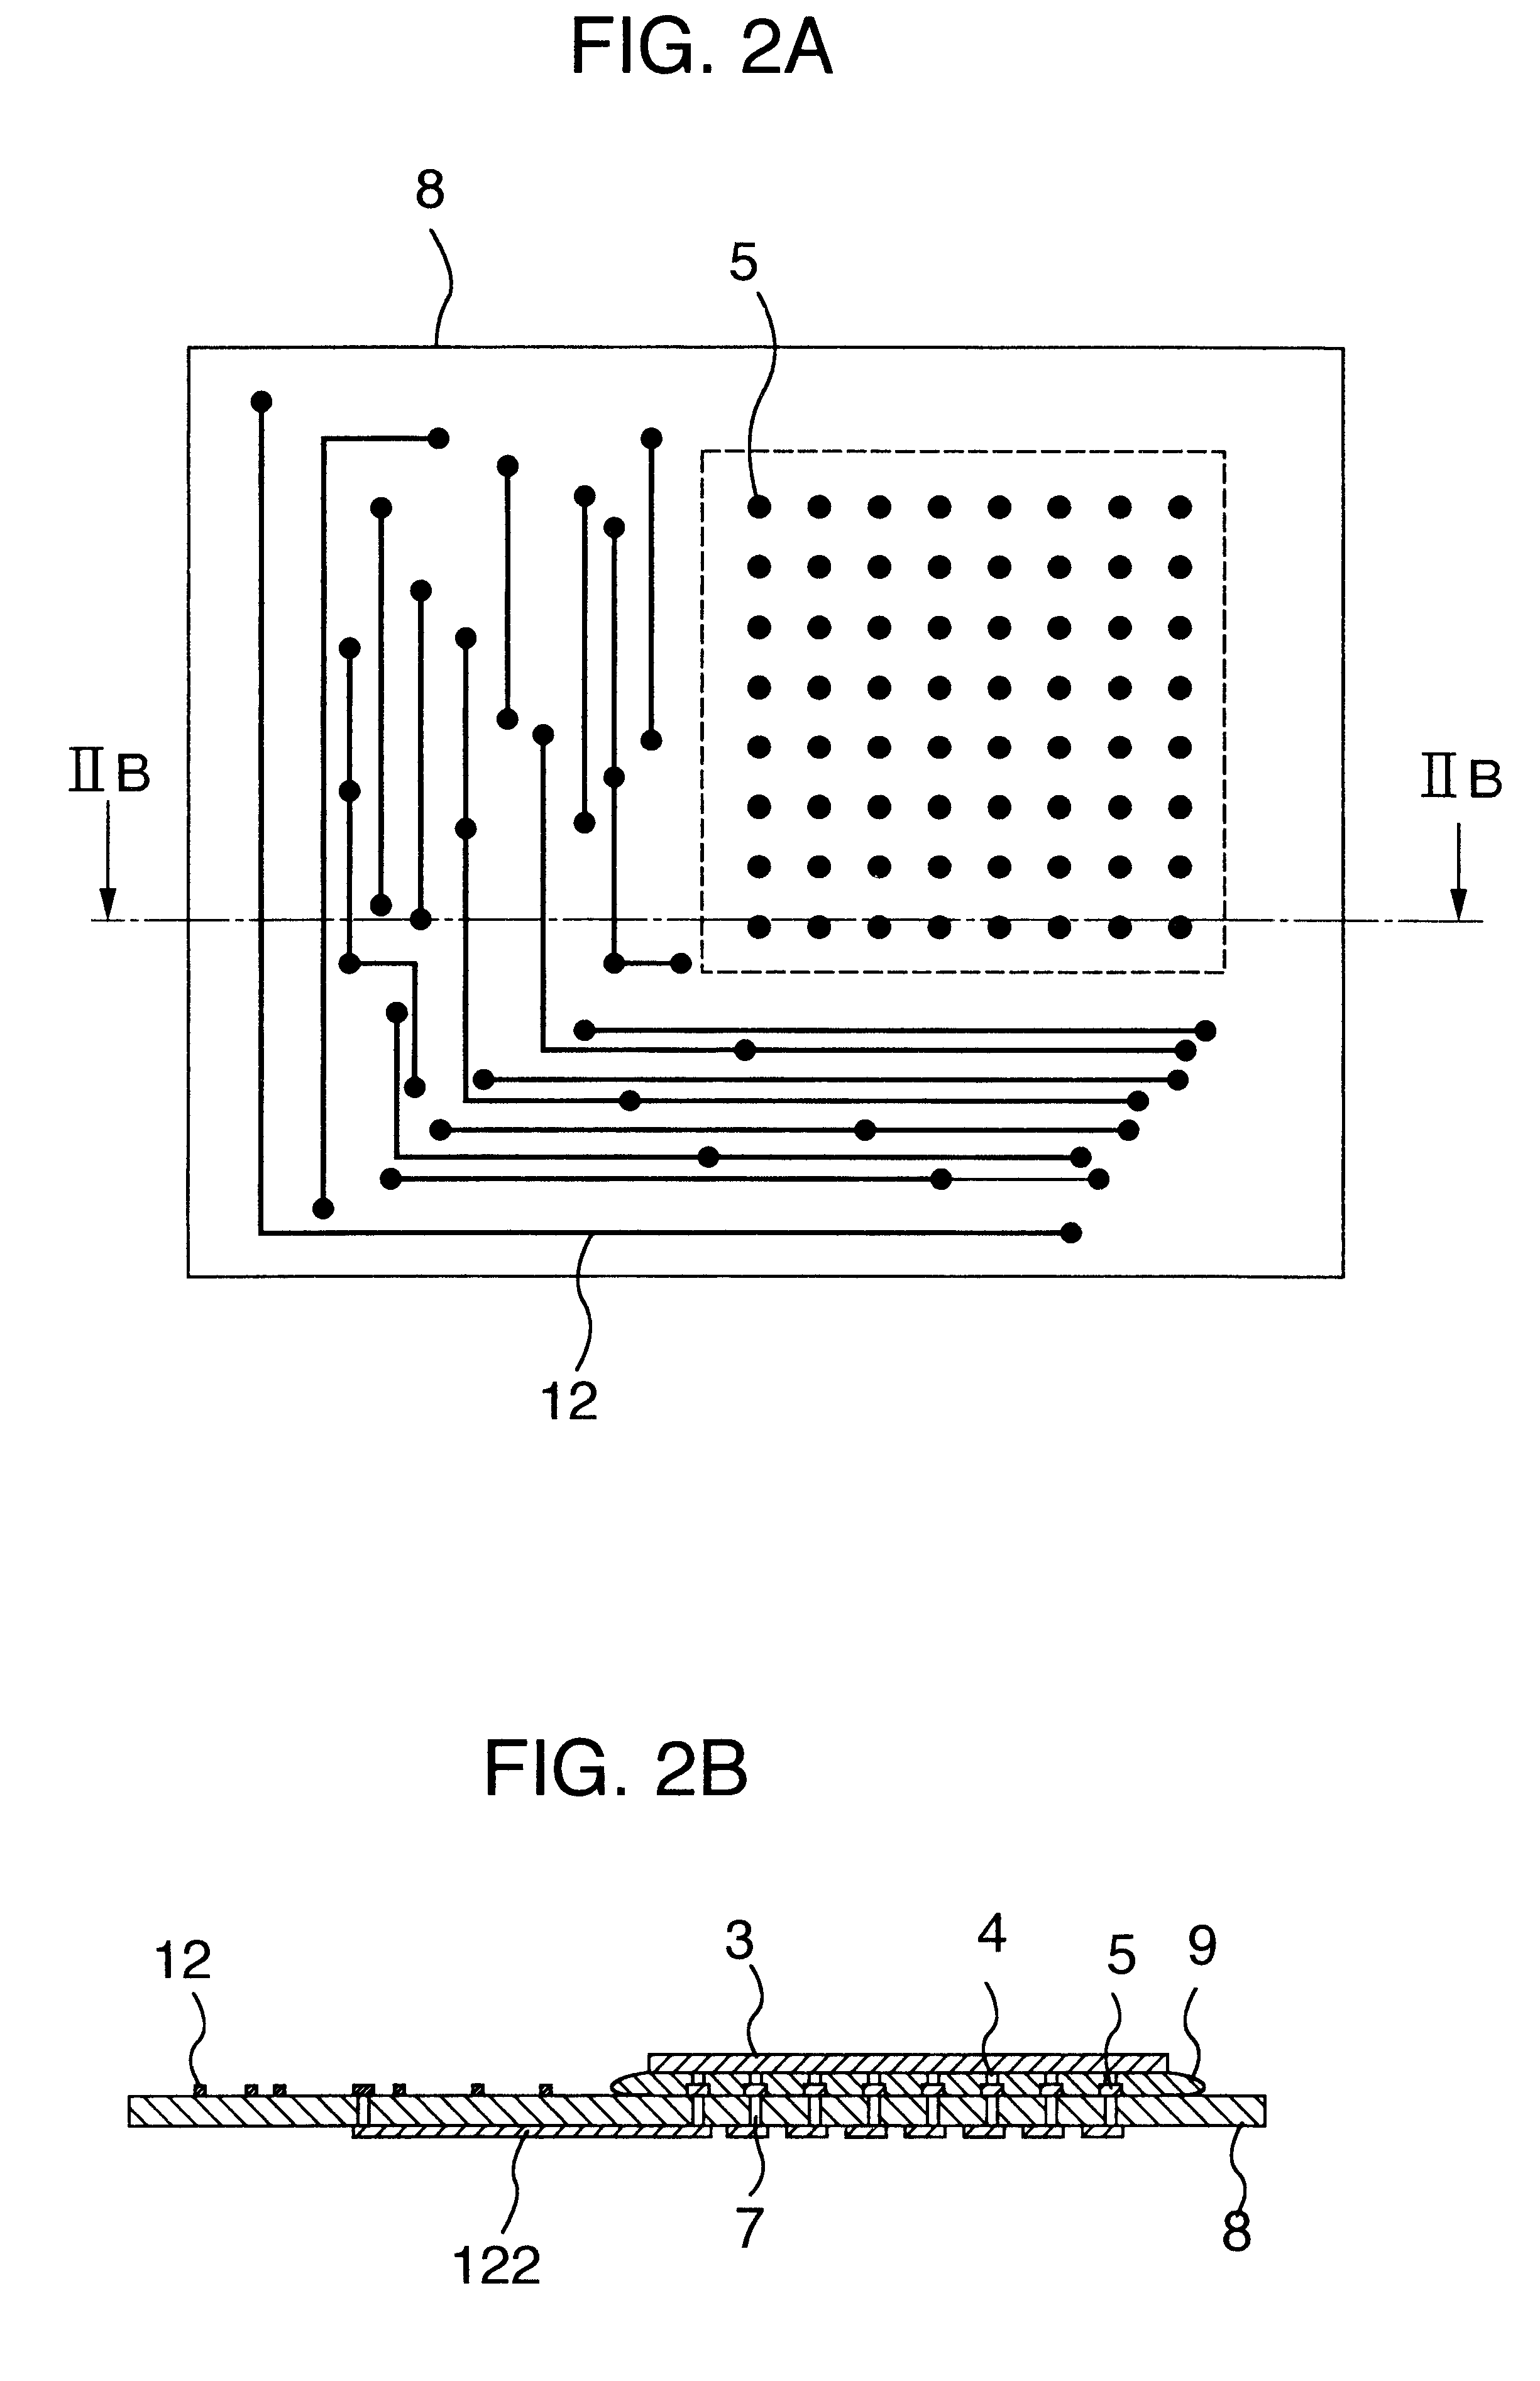 Substrate for mounting semiconductor chips